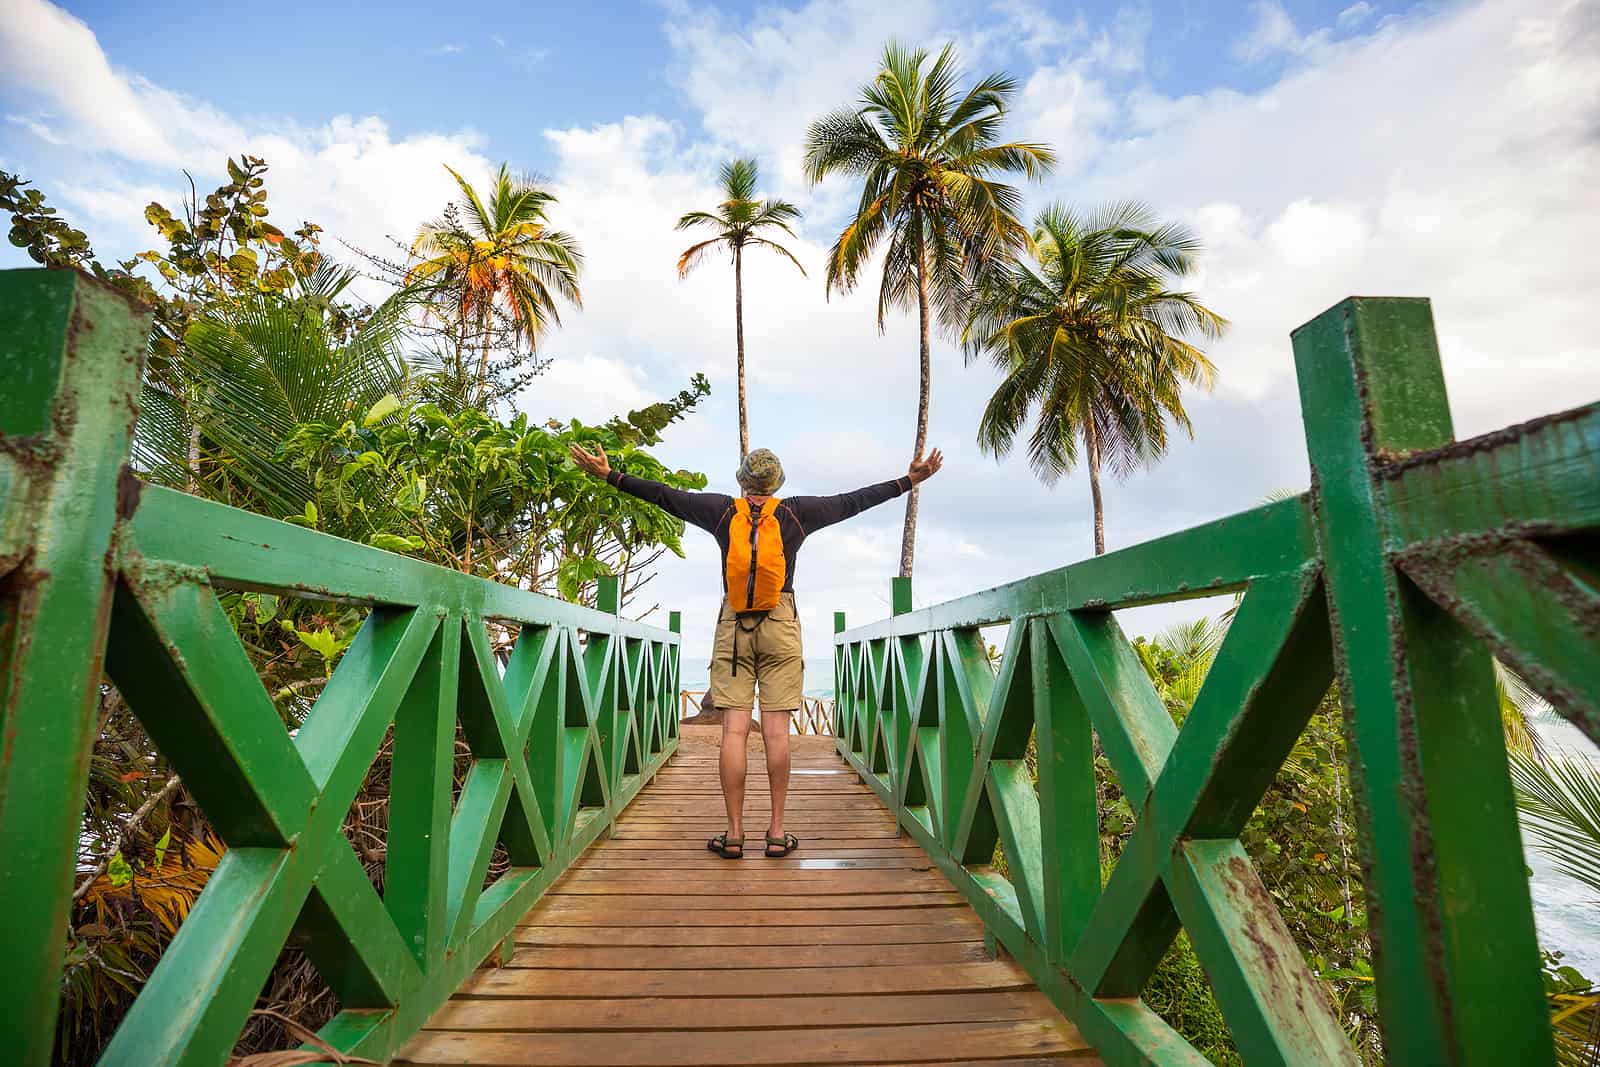 A therapeutic gap year can benefit your child in many ways, including helping them to build confidence, find and explore what they love and are good at, broaden their perspectives, and develop a new appreciation for life–with all its challenges and joys